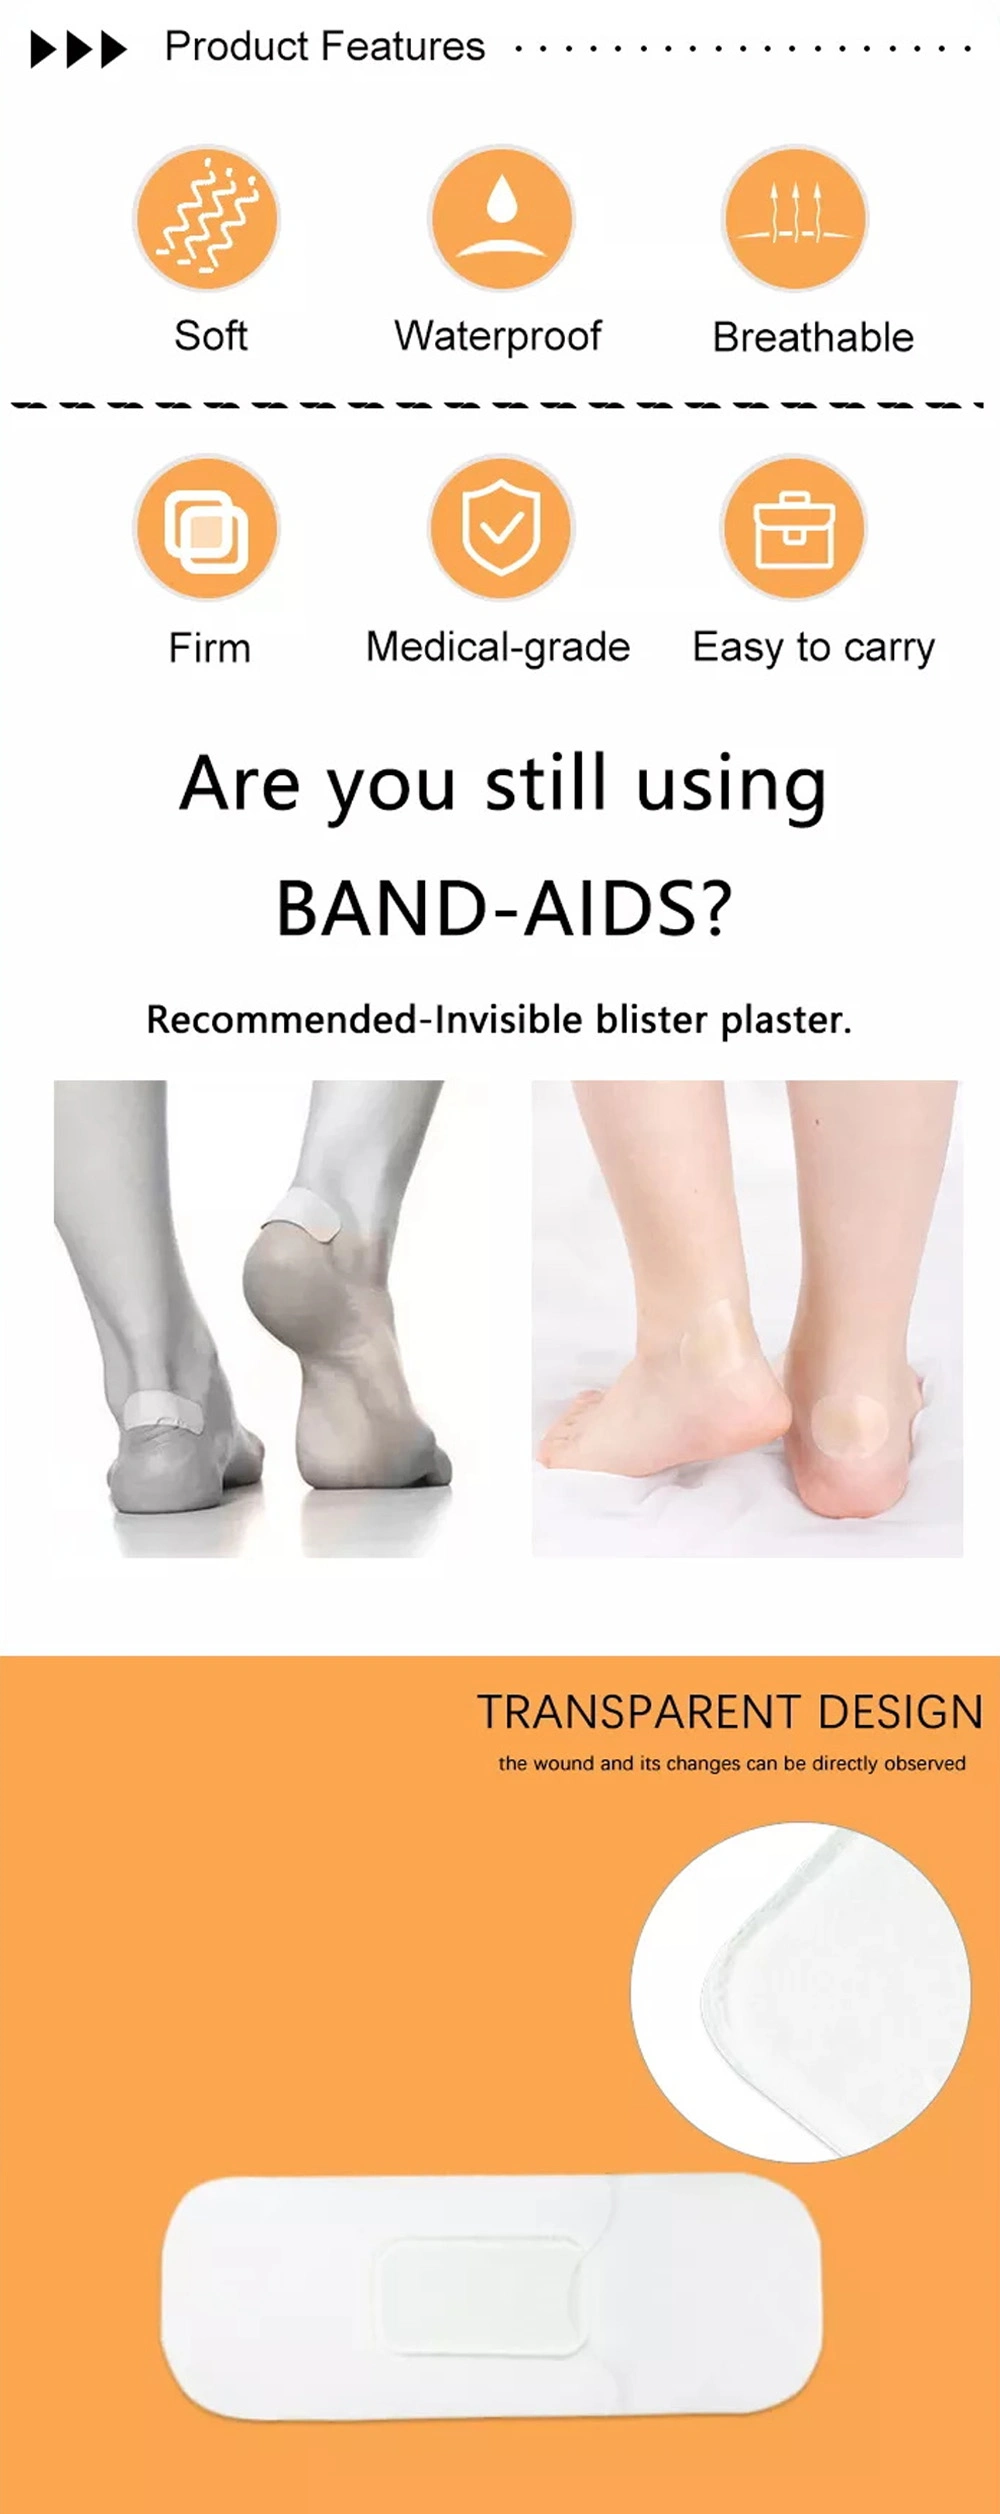 Top Quality Fast Aid Clear Gel Advanced Feet Blister Plasters Hydrogel Dressings for The Treatment of Burn Wounds